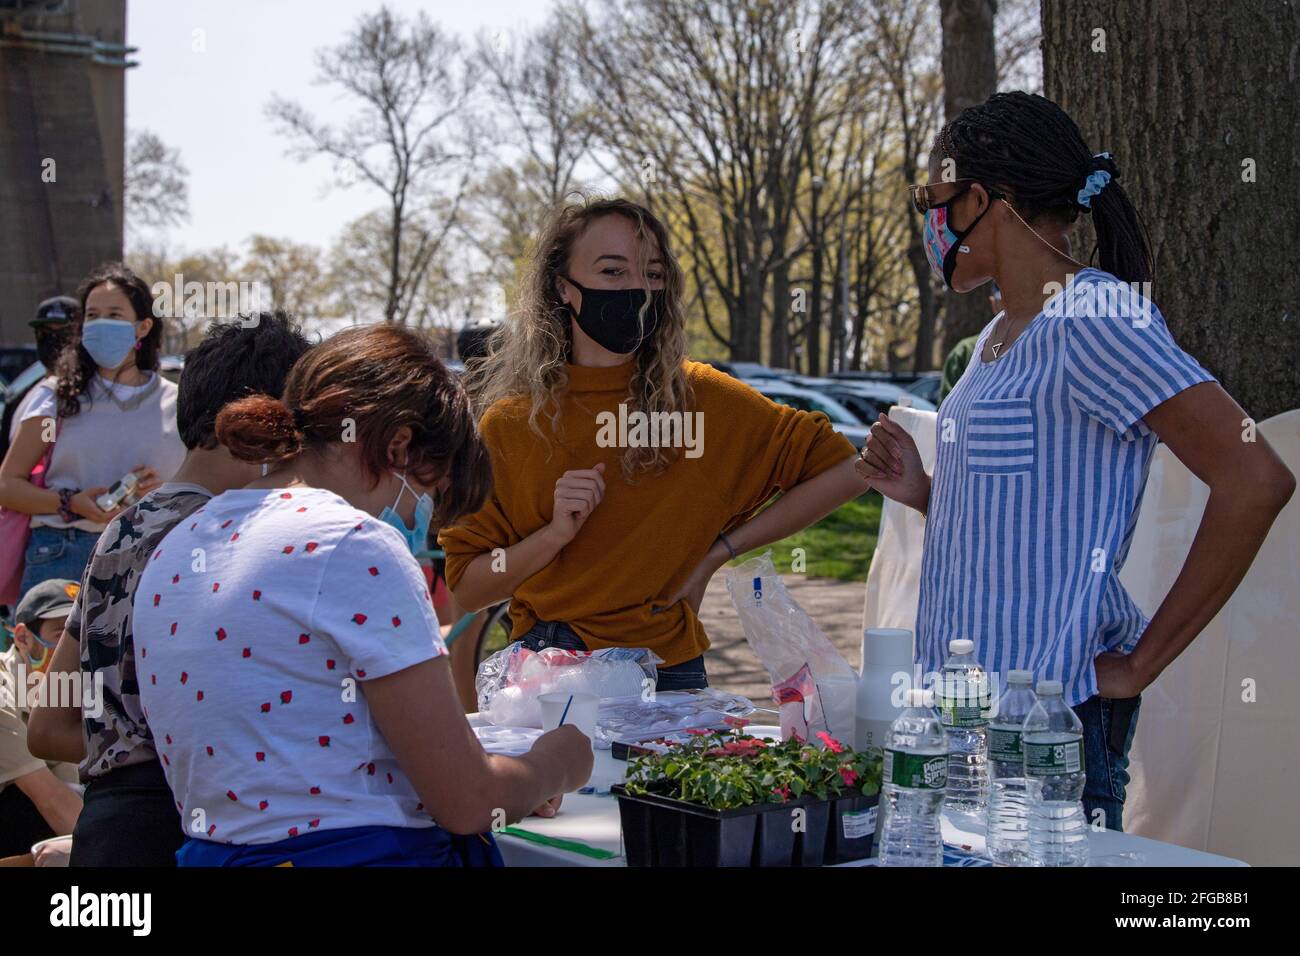 People water paint at the art table during an Earth Day Celebration in Astoria Park of the Queens borough of New York City.Congresswoman Ocasio-Cortez joined by New York State Senator Jessica Ramos and New York Assembly Member Zohran Mamdani for remarks about the NRG Energy, Inc proposal for the Astoria power plant. The Congresswoman opposes NRG's effort to replace their 50-year old turbine at the Astoria 'peaker' plant with a generator that burns fossil fuels extracted by fracking. (Photo by Ron Adar/SOPA Images/Sipa USA) Stock Photo